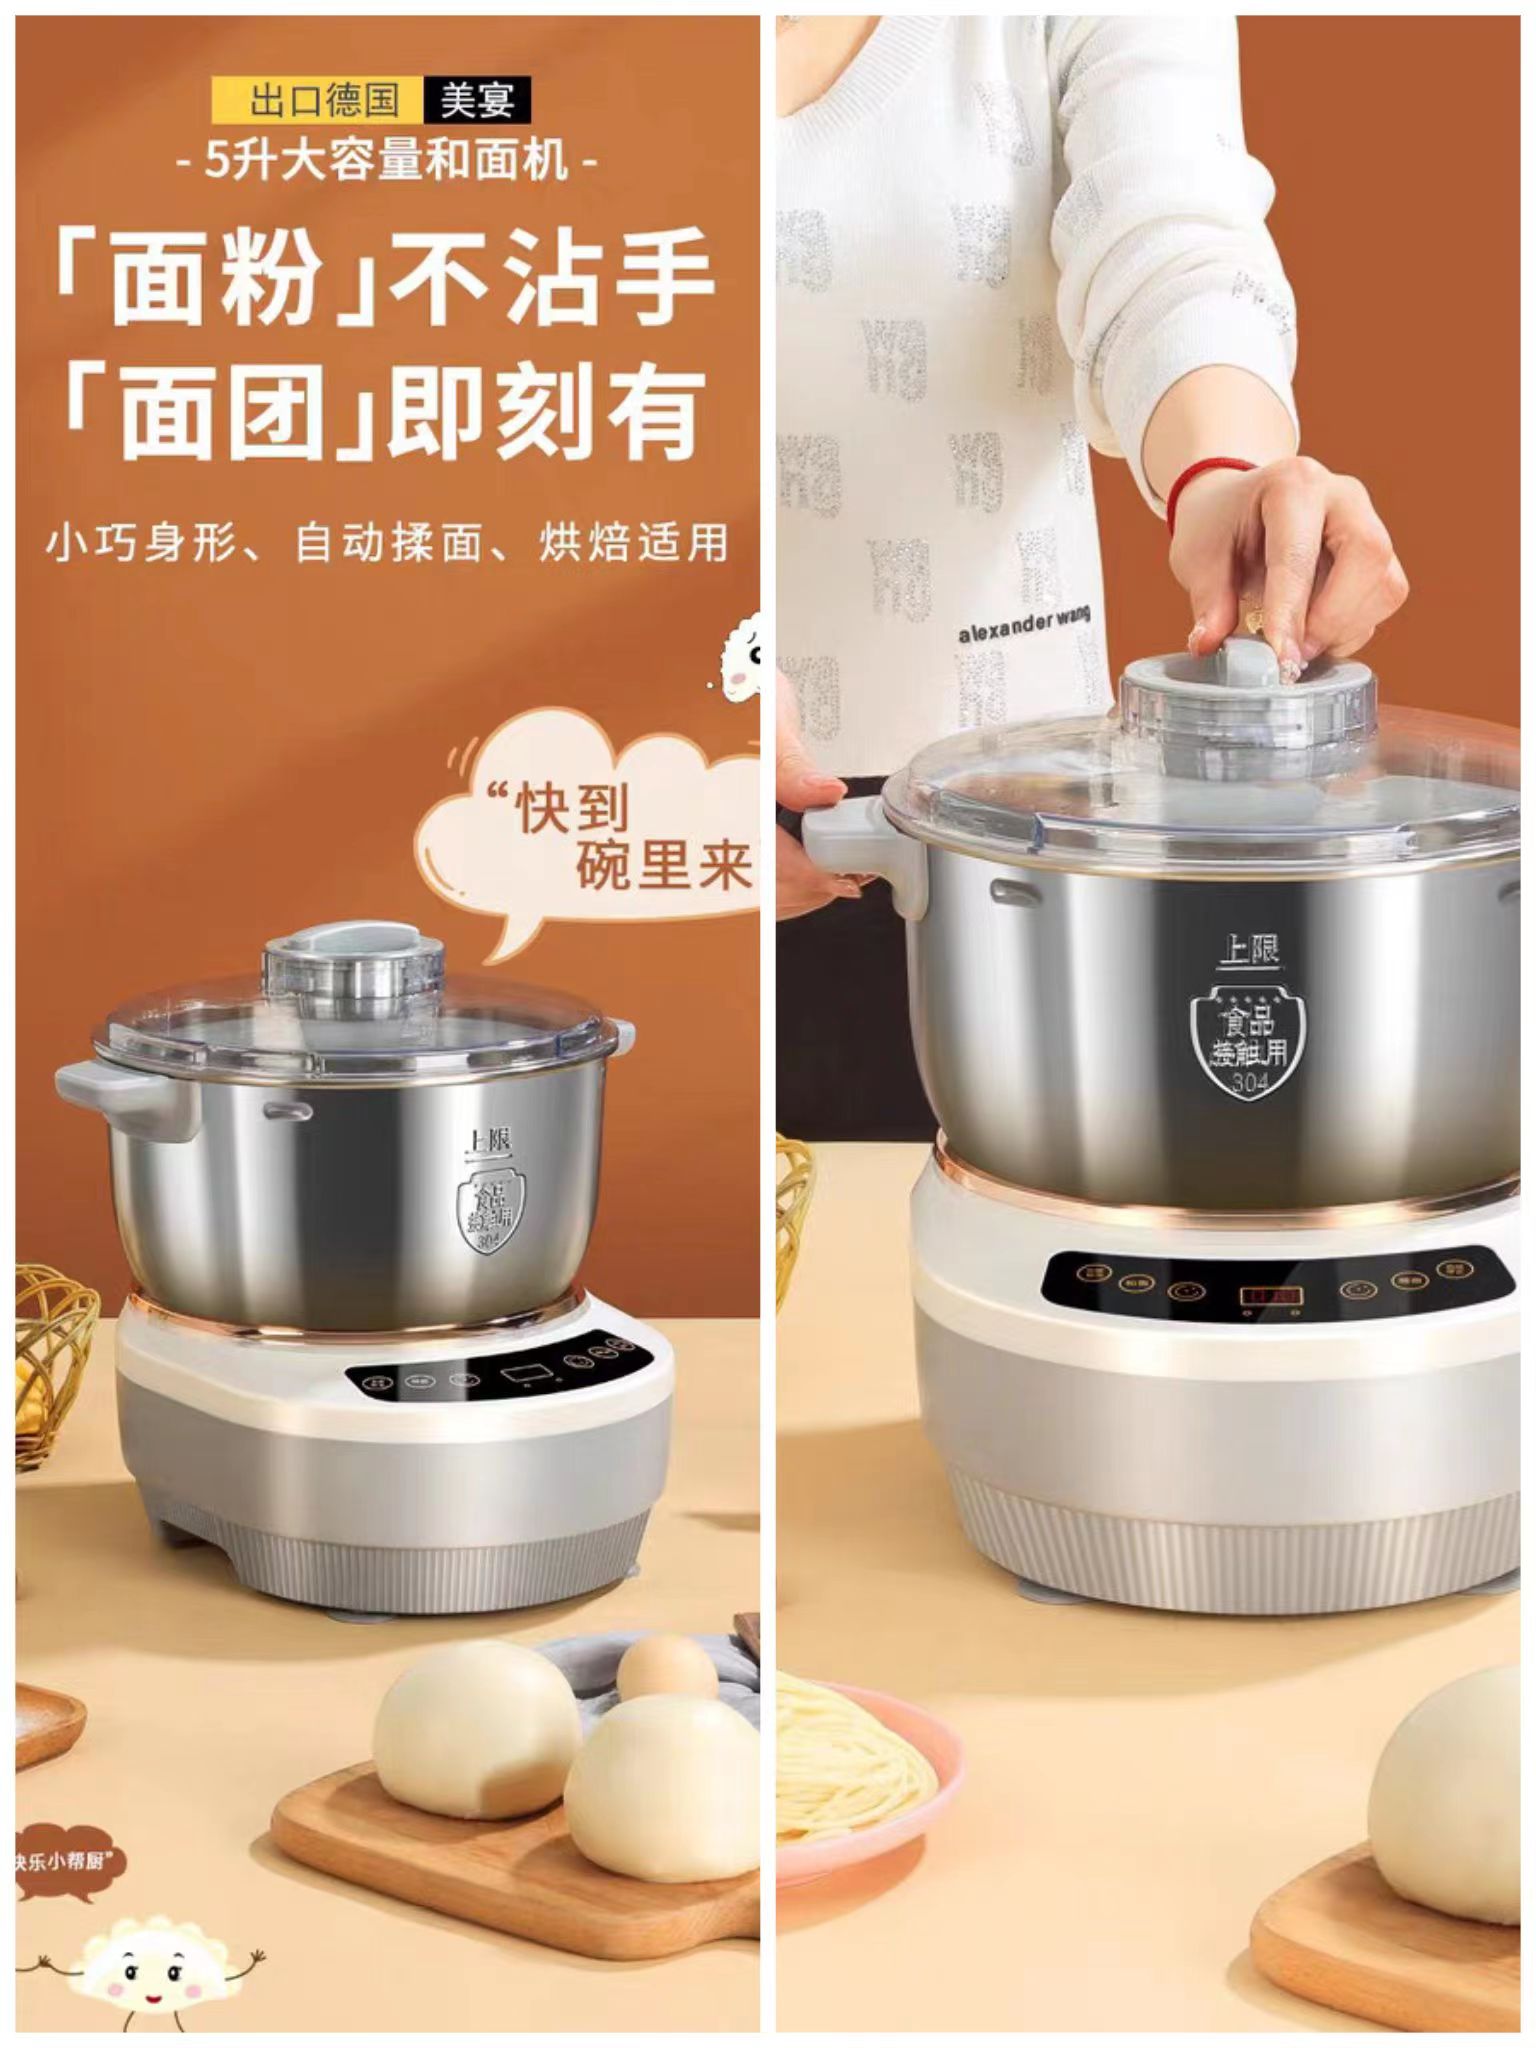 Noodle kneading machine, household stainless steel chef, fully automatic mixer, intelligent hair awakening machine, small and noodle making machine